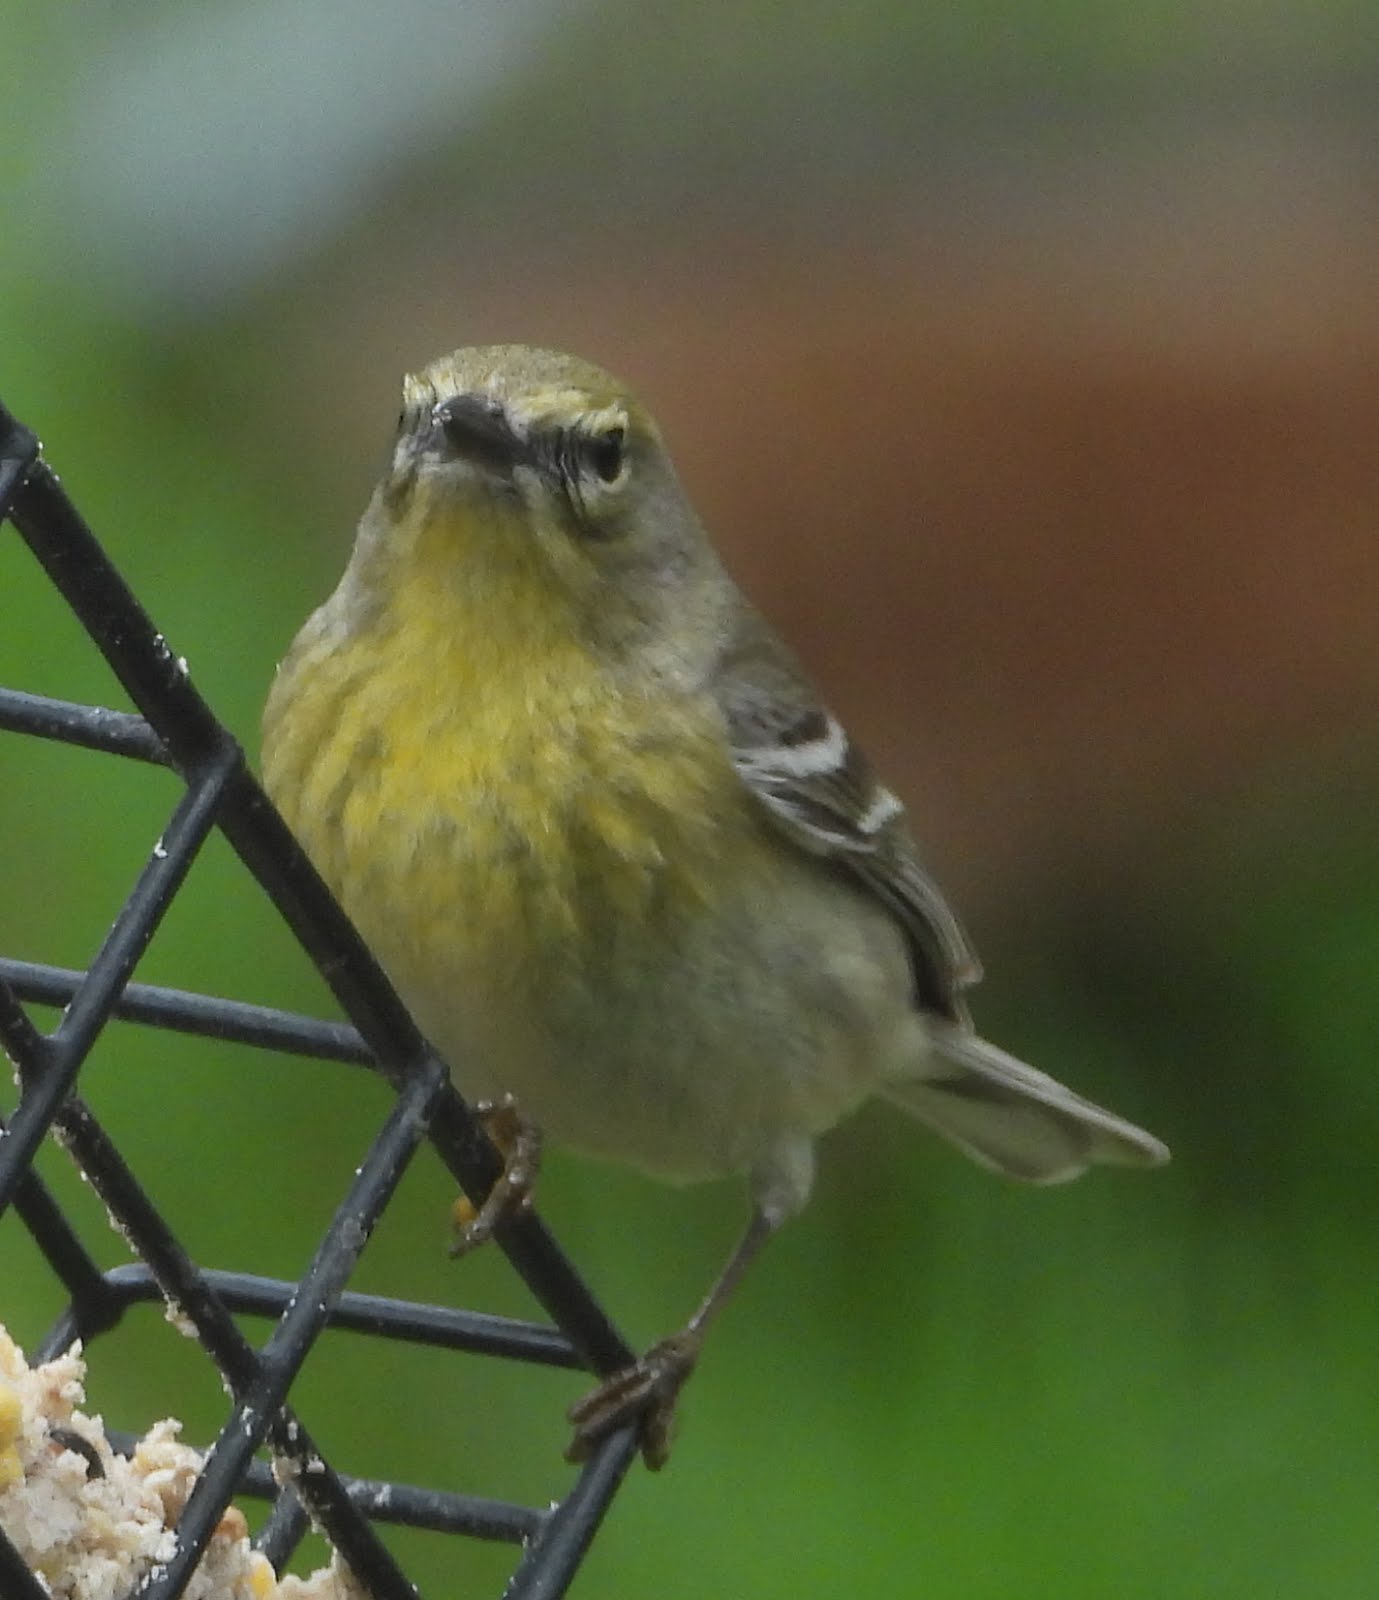 A Pine Warbler at our Suet feeder 30-April-2020